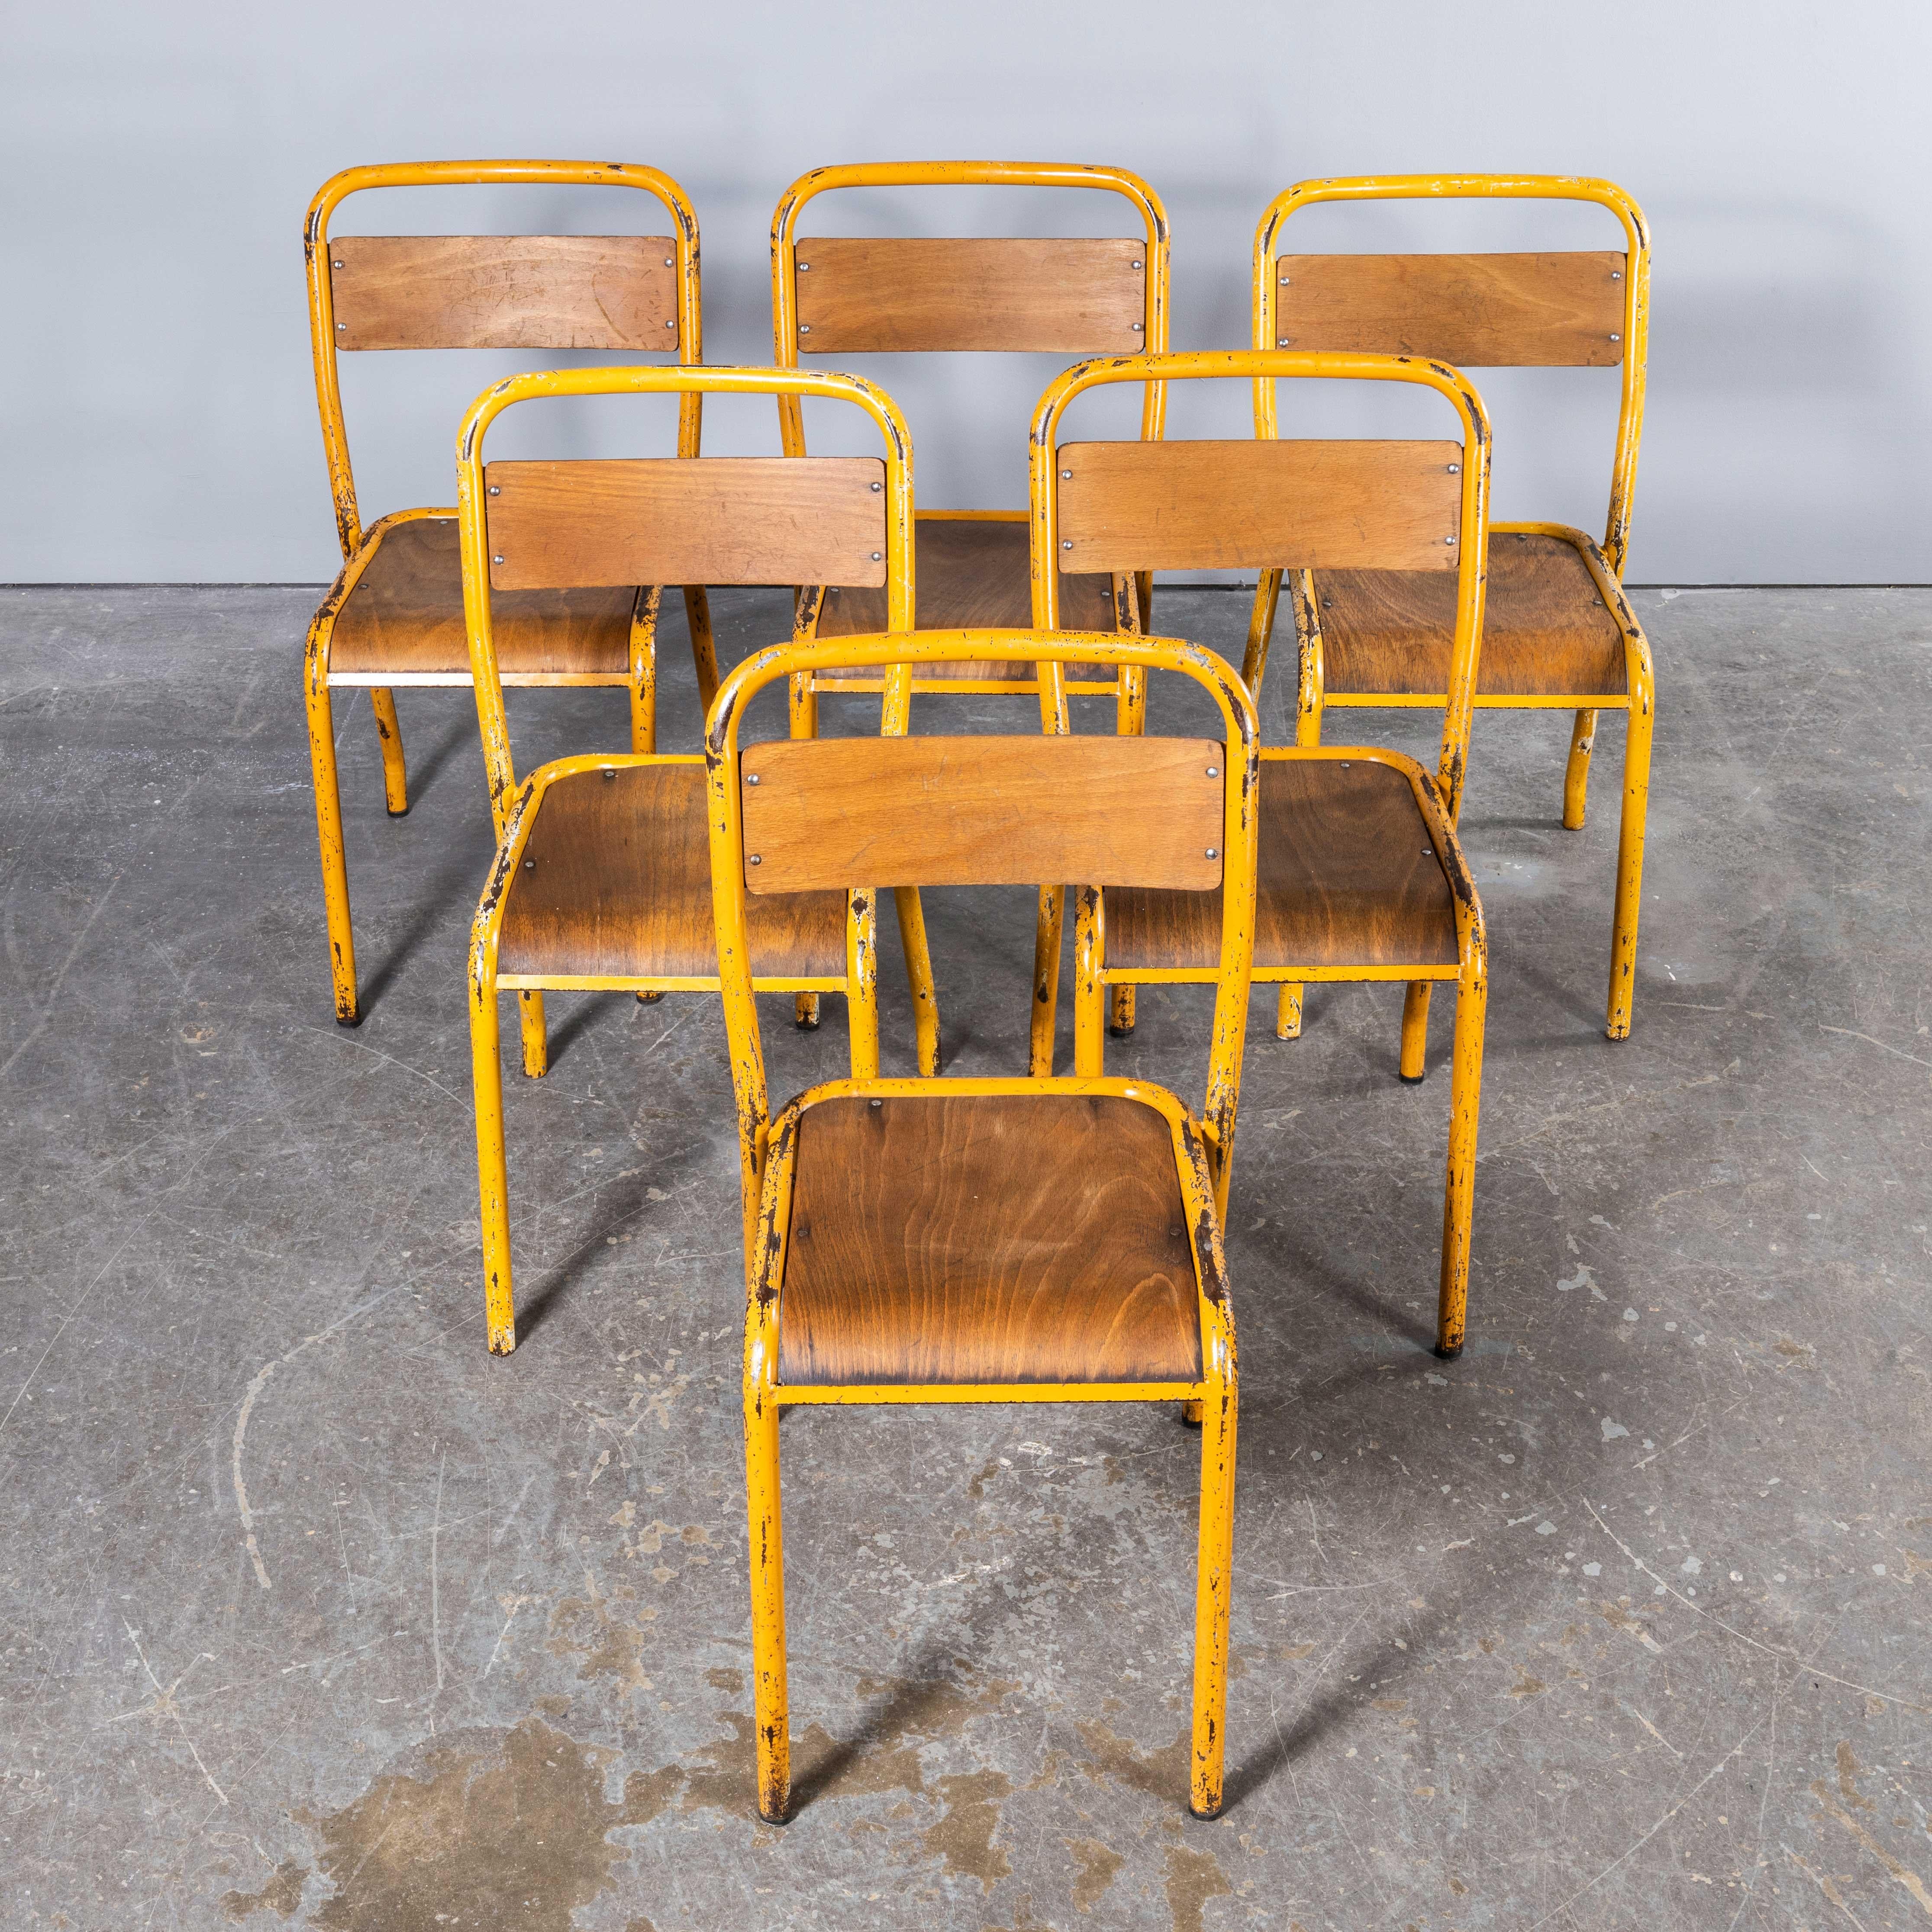 1950's Original Yellow French Tolix Wood Seat Metal Bistro Dining Chair - Large  For Sale 2